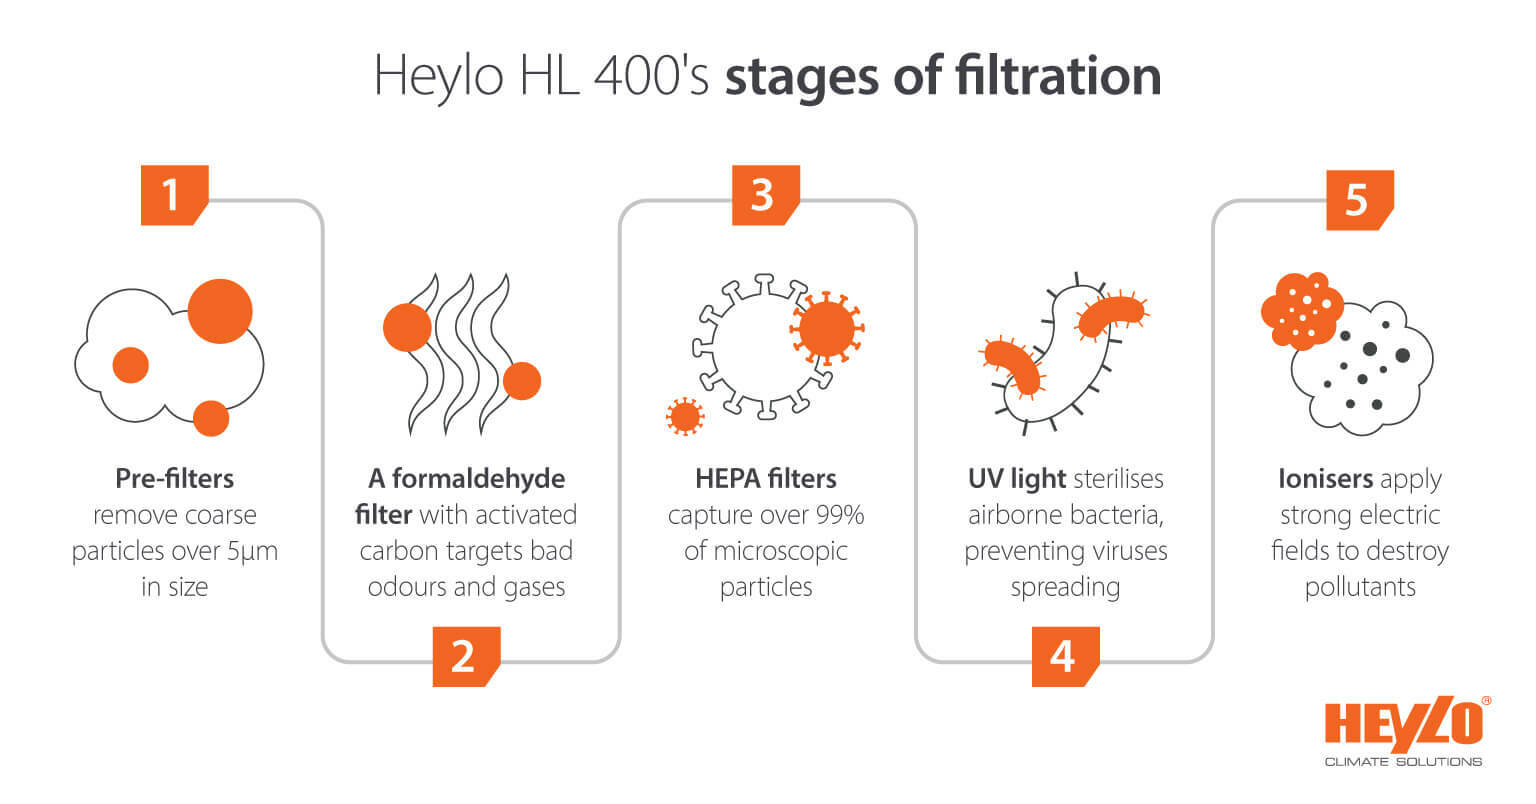 Heylo HL 400 air purifiers multiple stages of filtration - Infographic image